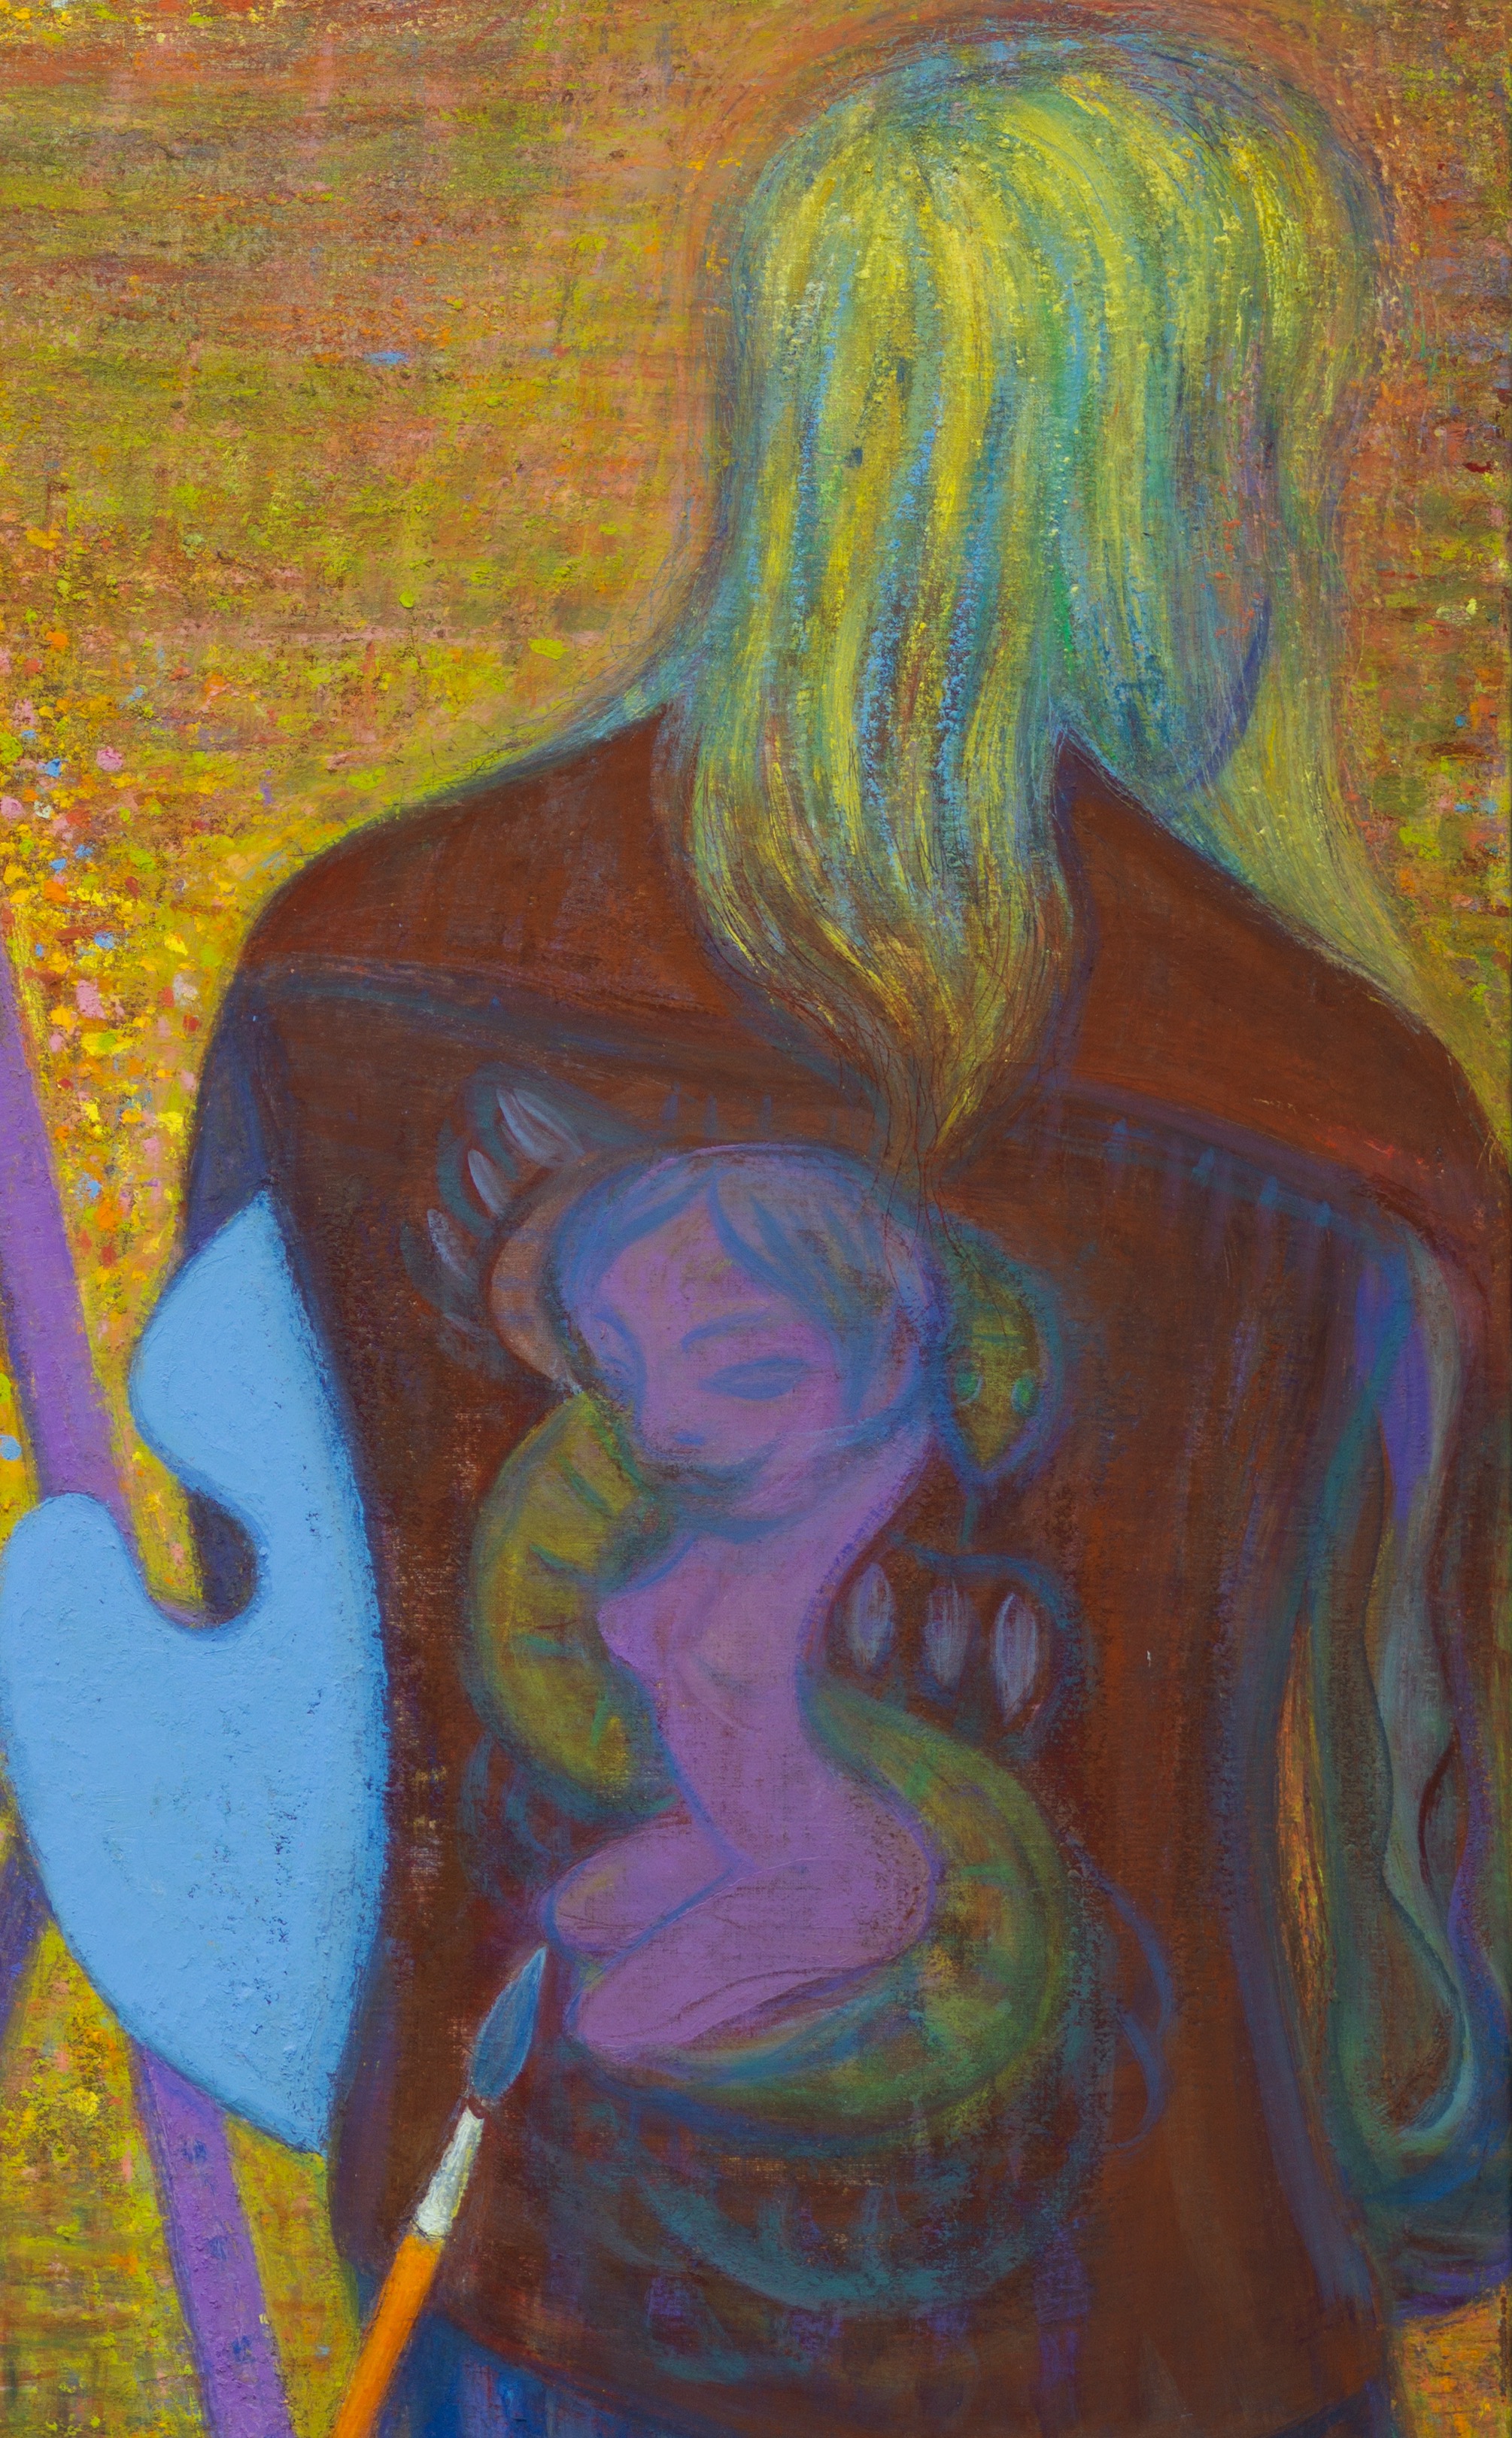 The Fauves, 2008-2009 (detail)